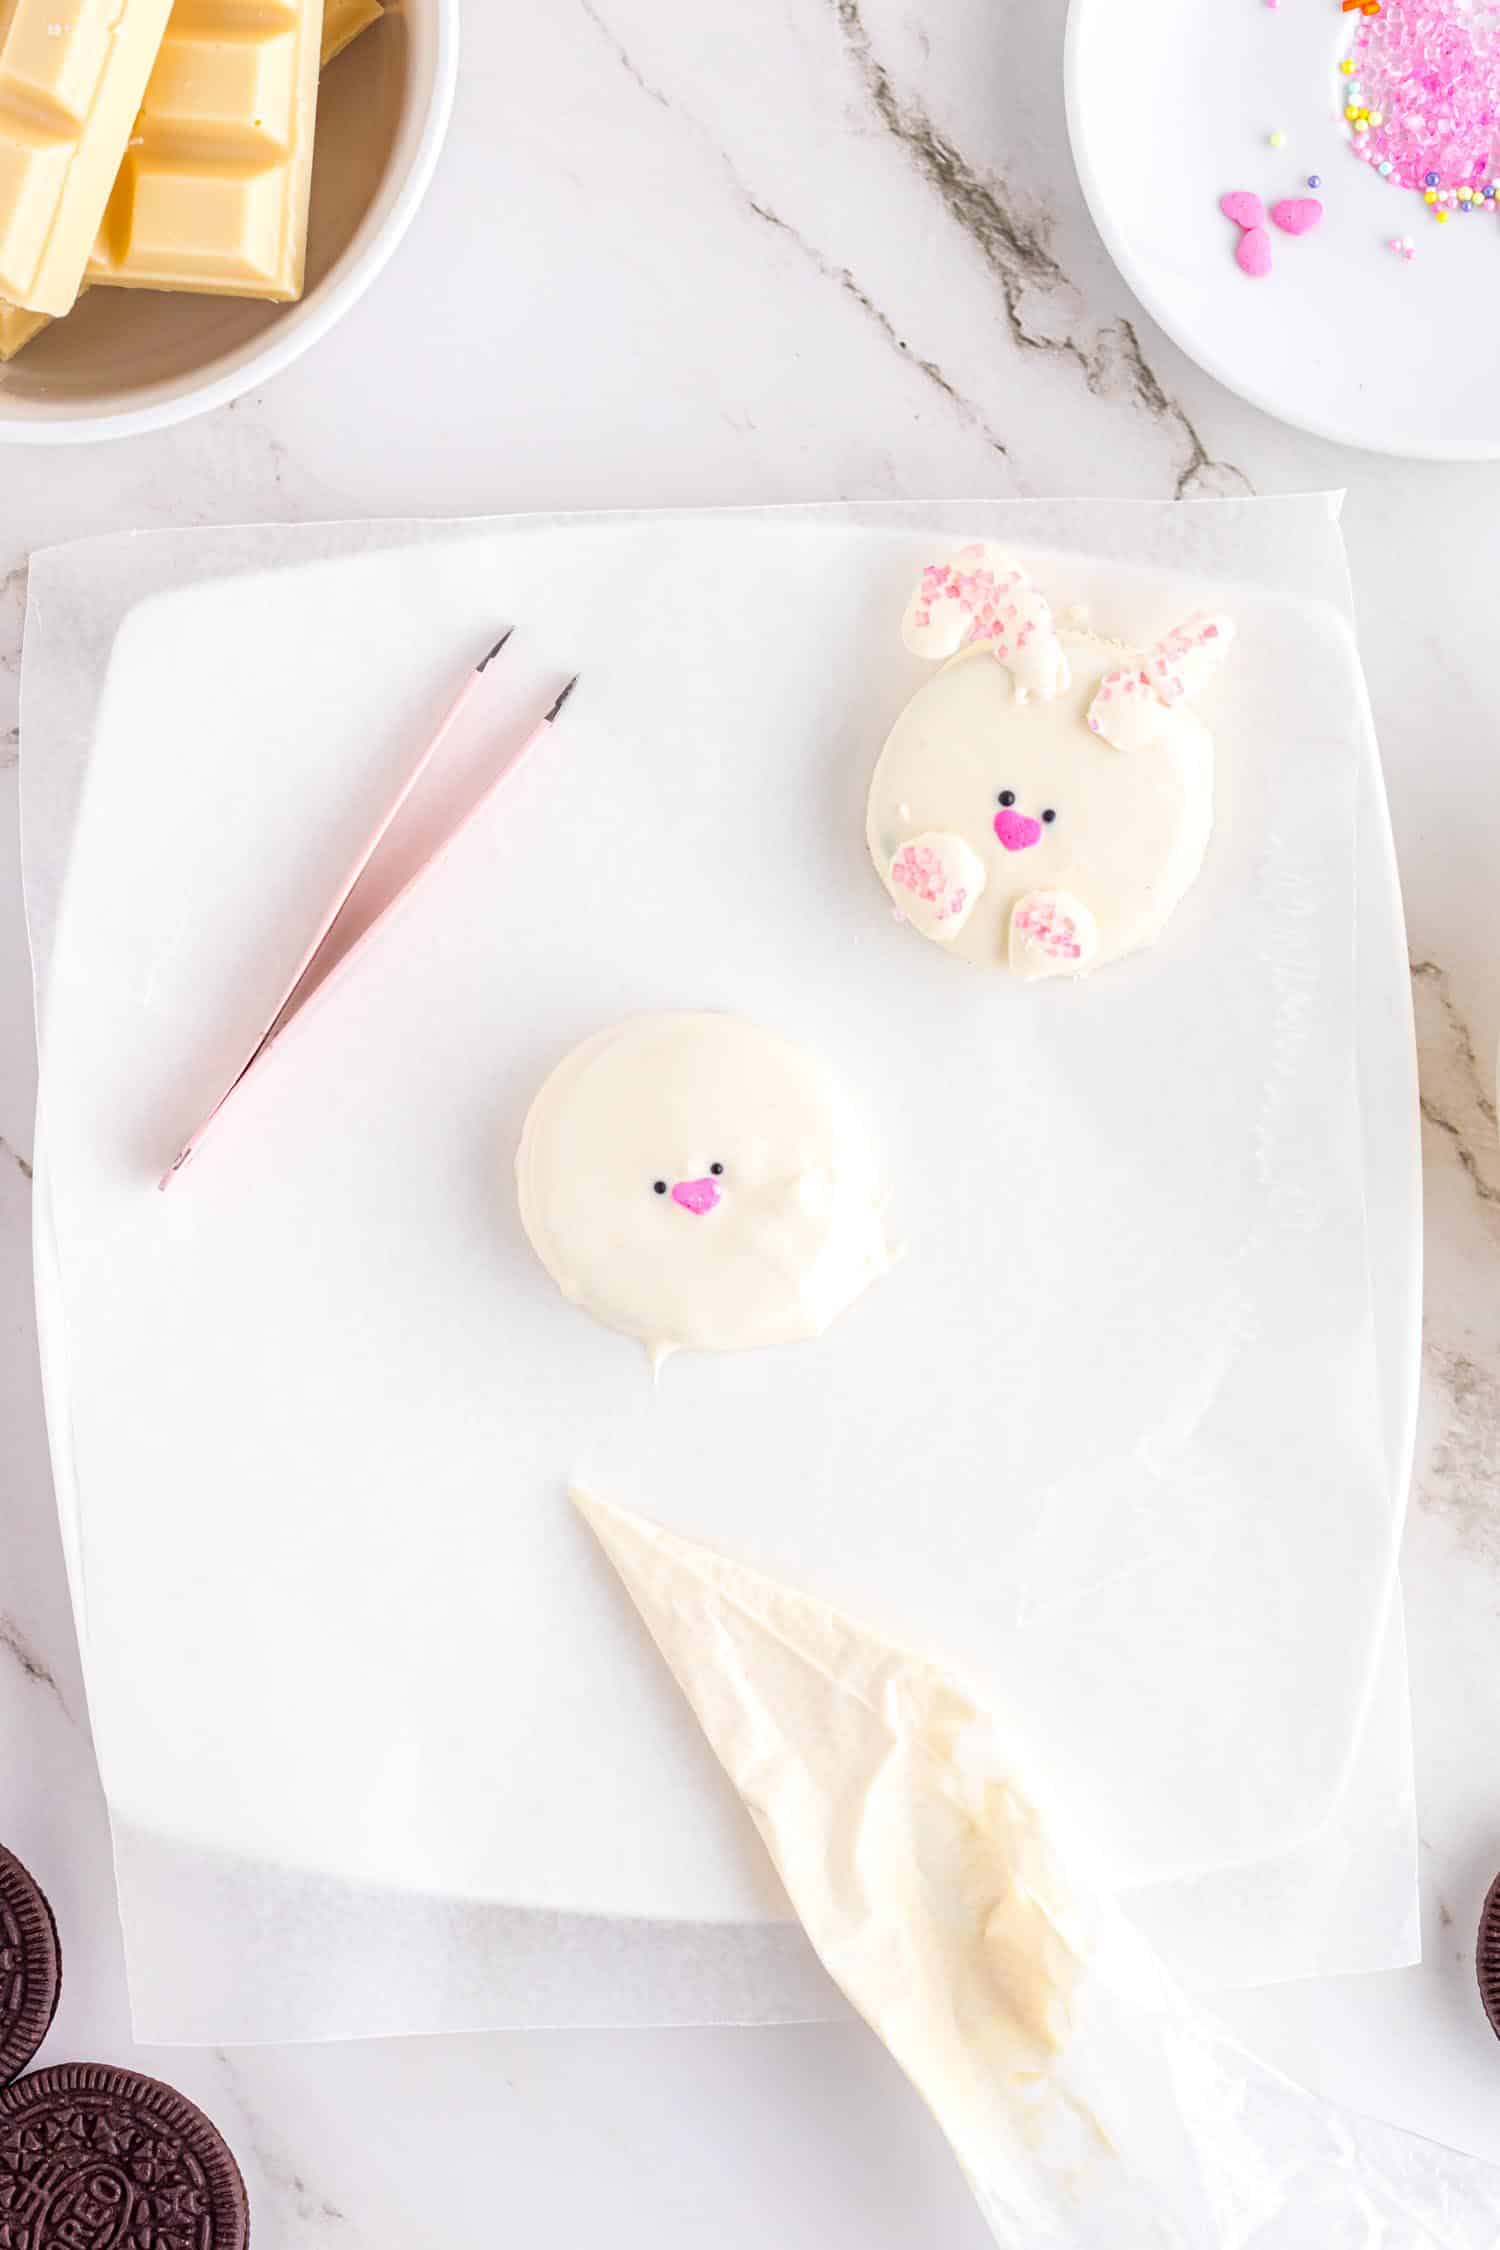 White chocolate covered Oreo cookies being decorated to look like Bunnies using piping bag, tweezers, and sprinkles.